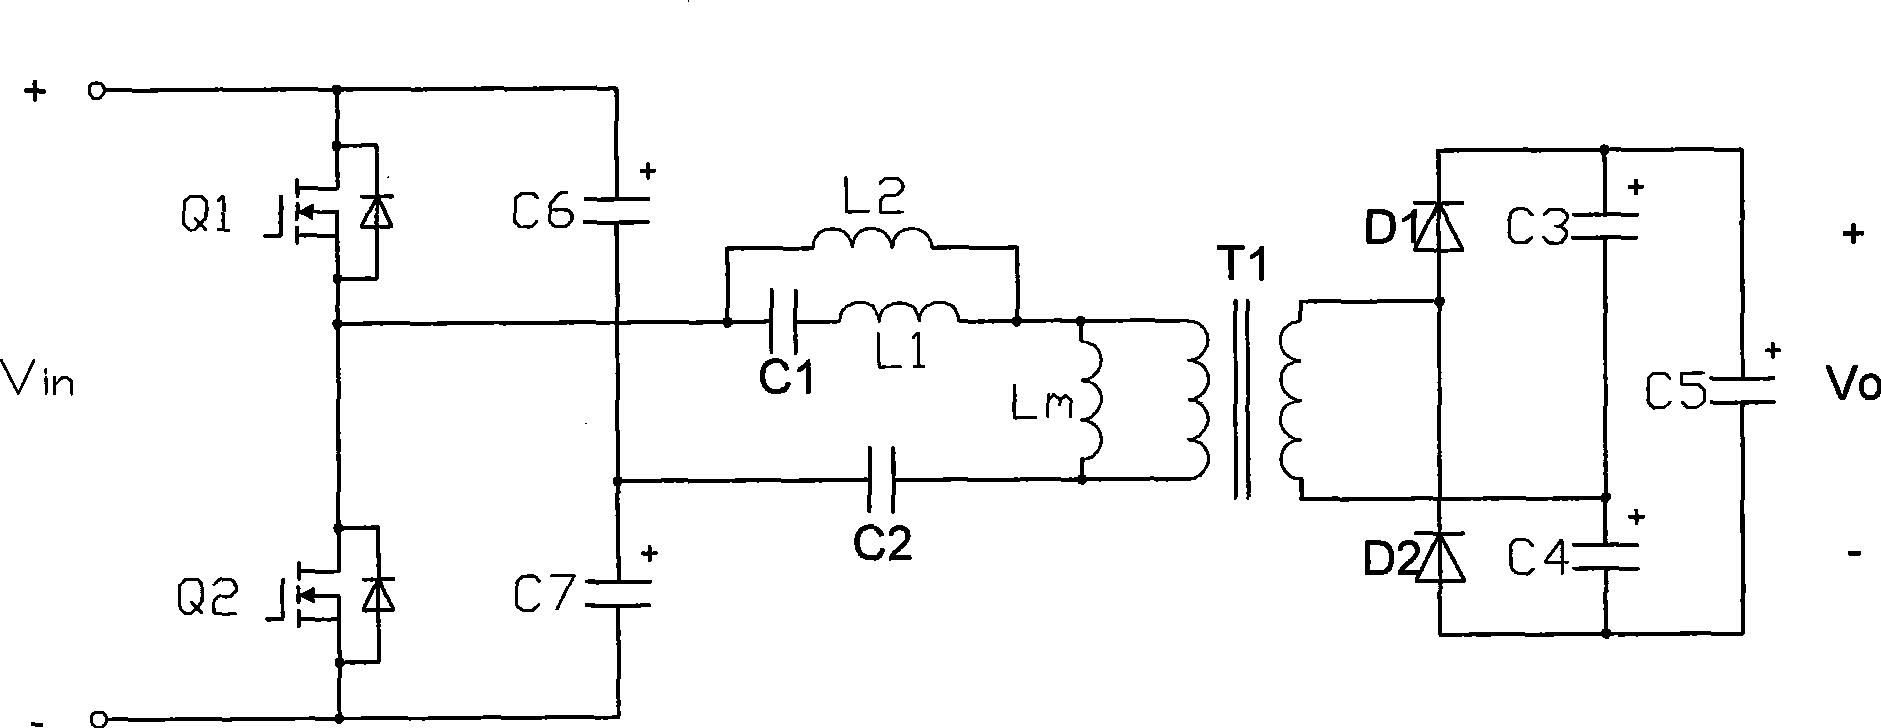 Voltage multiplying synchronous rectifying multi-resonance soft switching converter